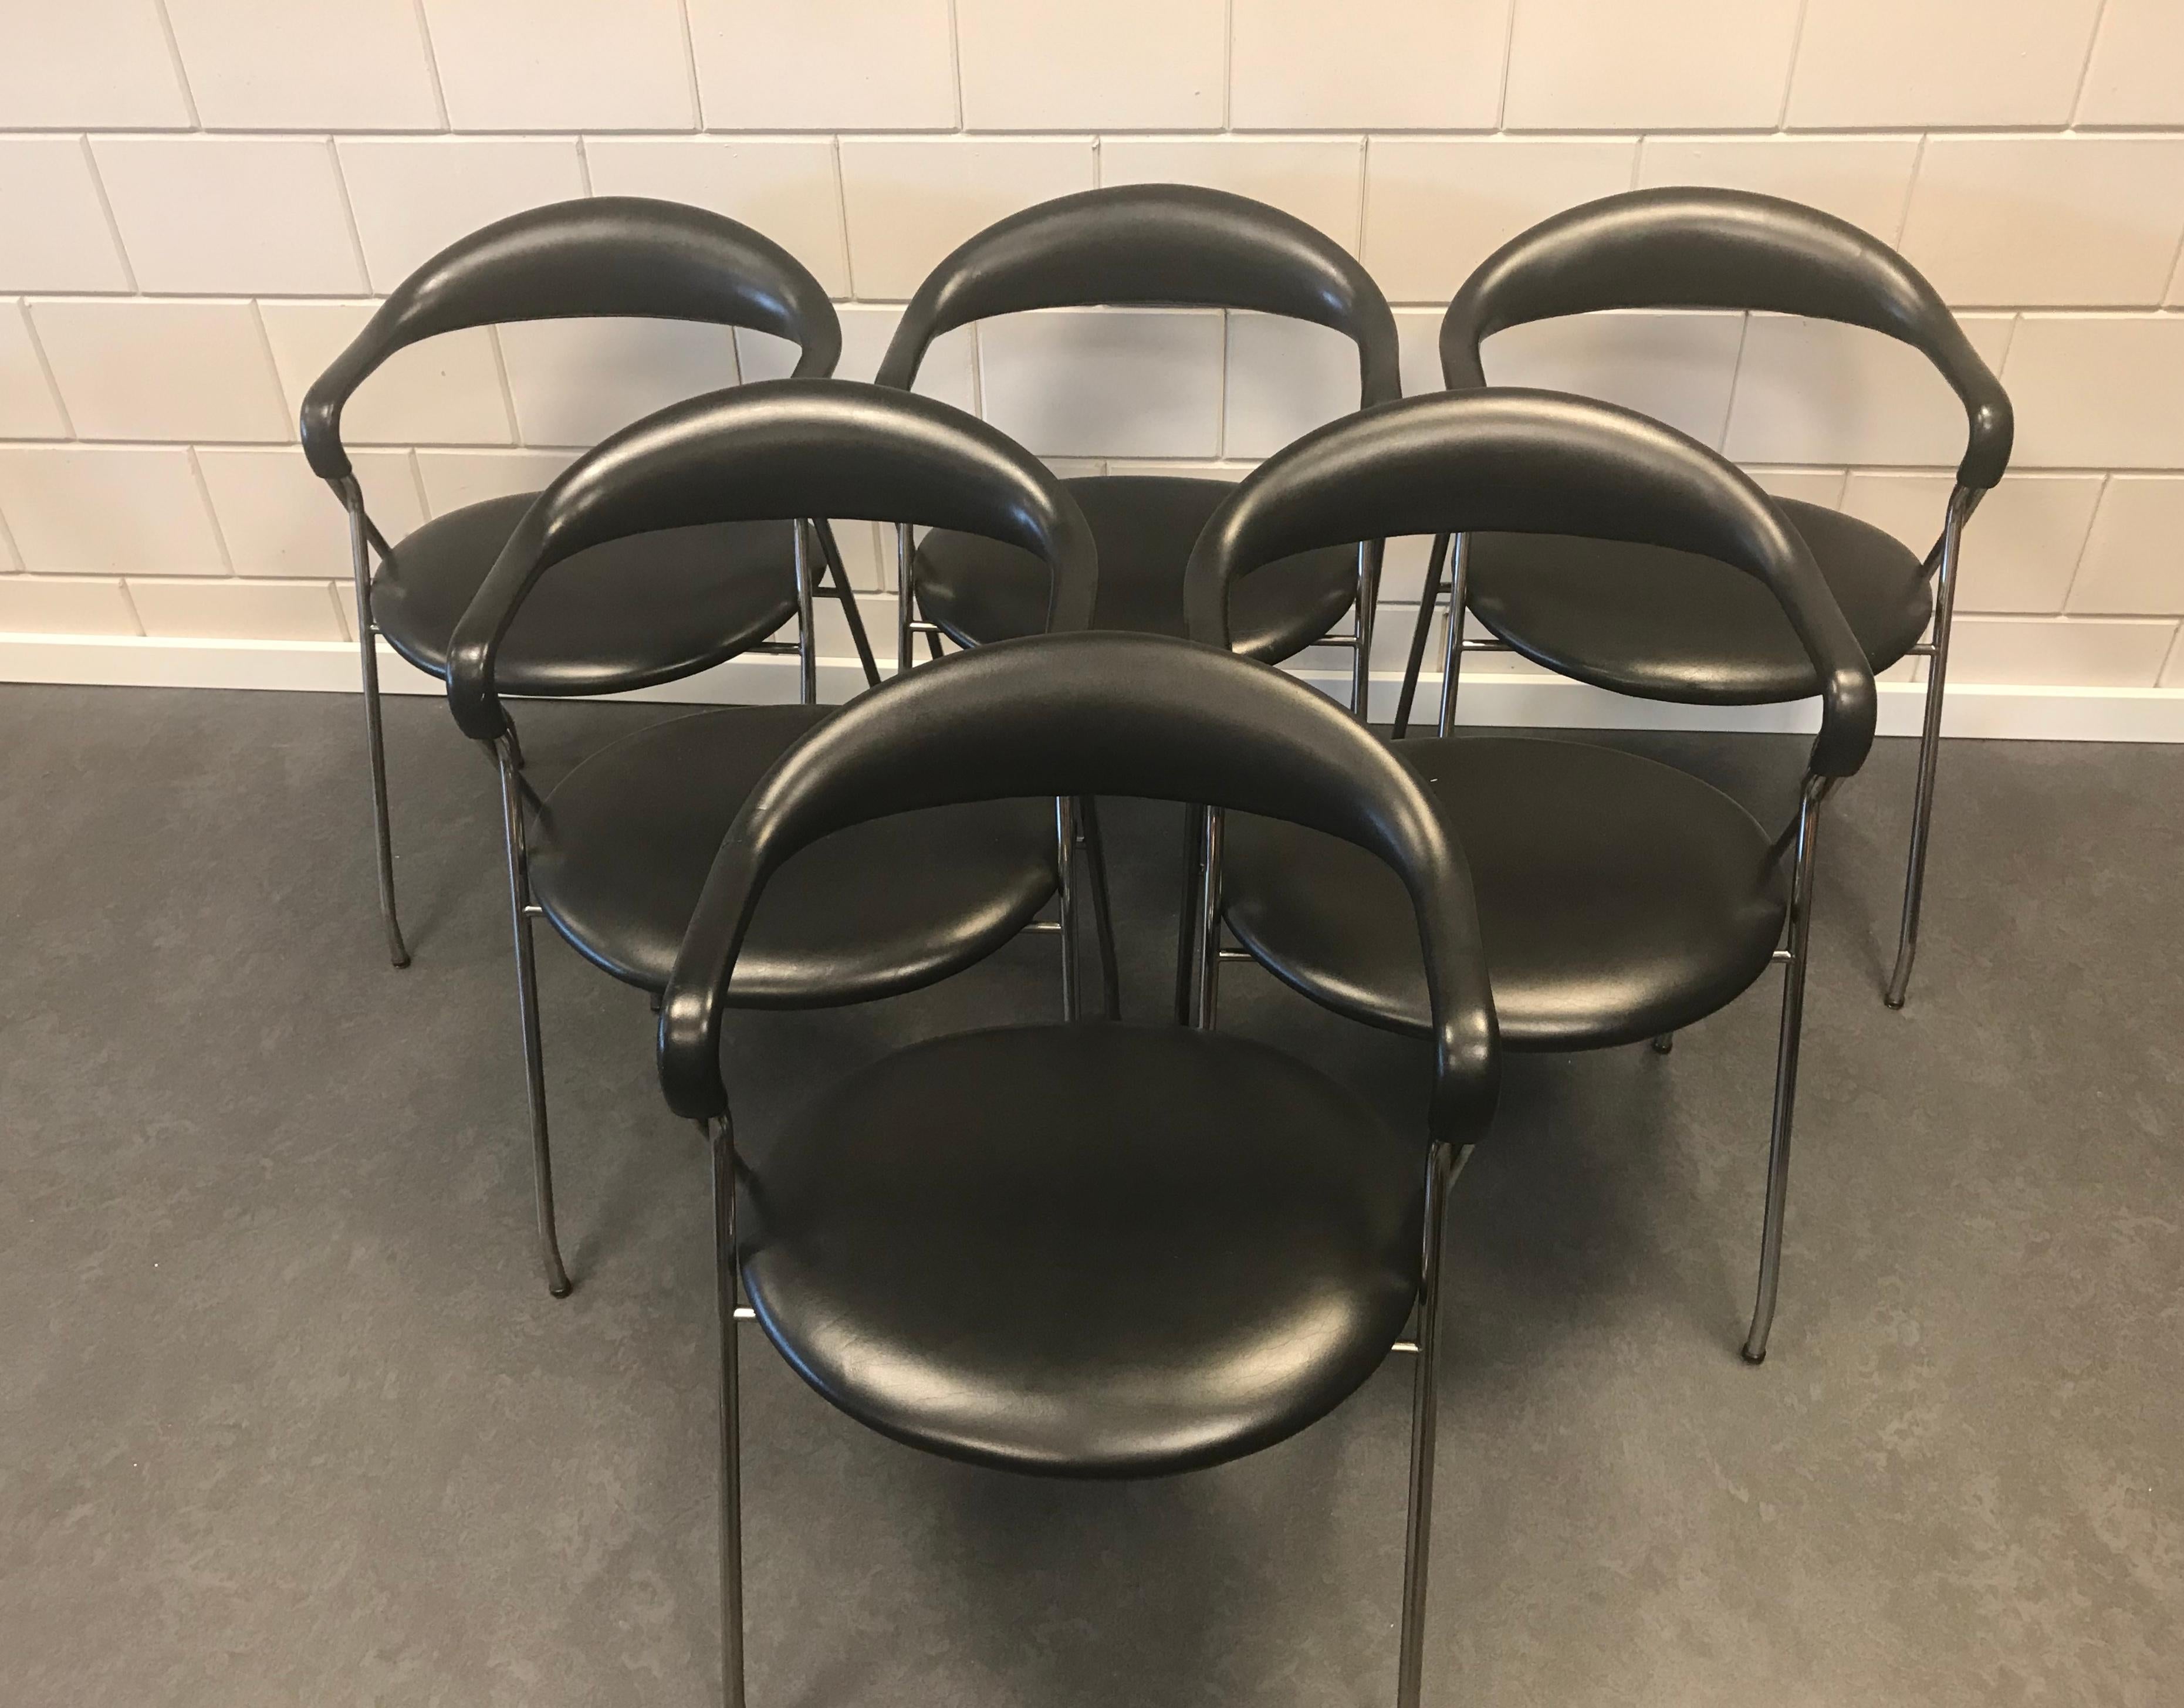 6 chairs available from Hans Eichenberger, Switzerland born 1926.
The chairs, Saffa HE 103 are made for Dietiker, Switzerland in 1955. 

Legs from chromed tubular steel with leather seating and backrest. The design may be minimalistic, but they